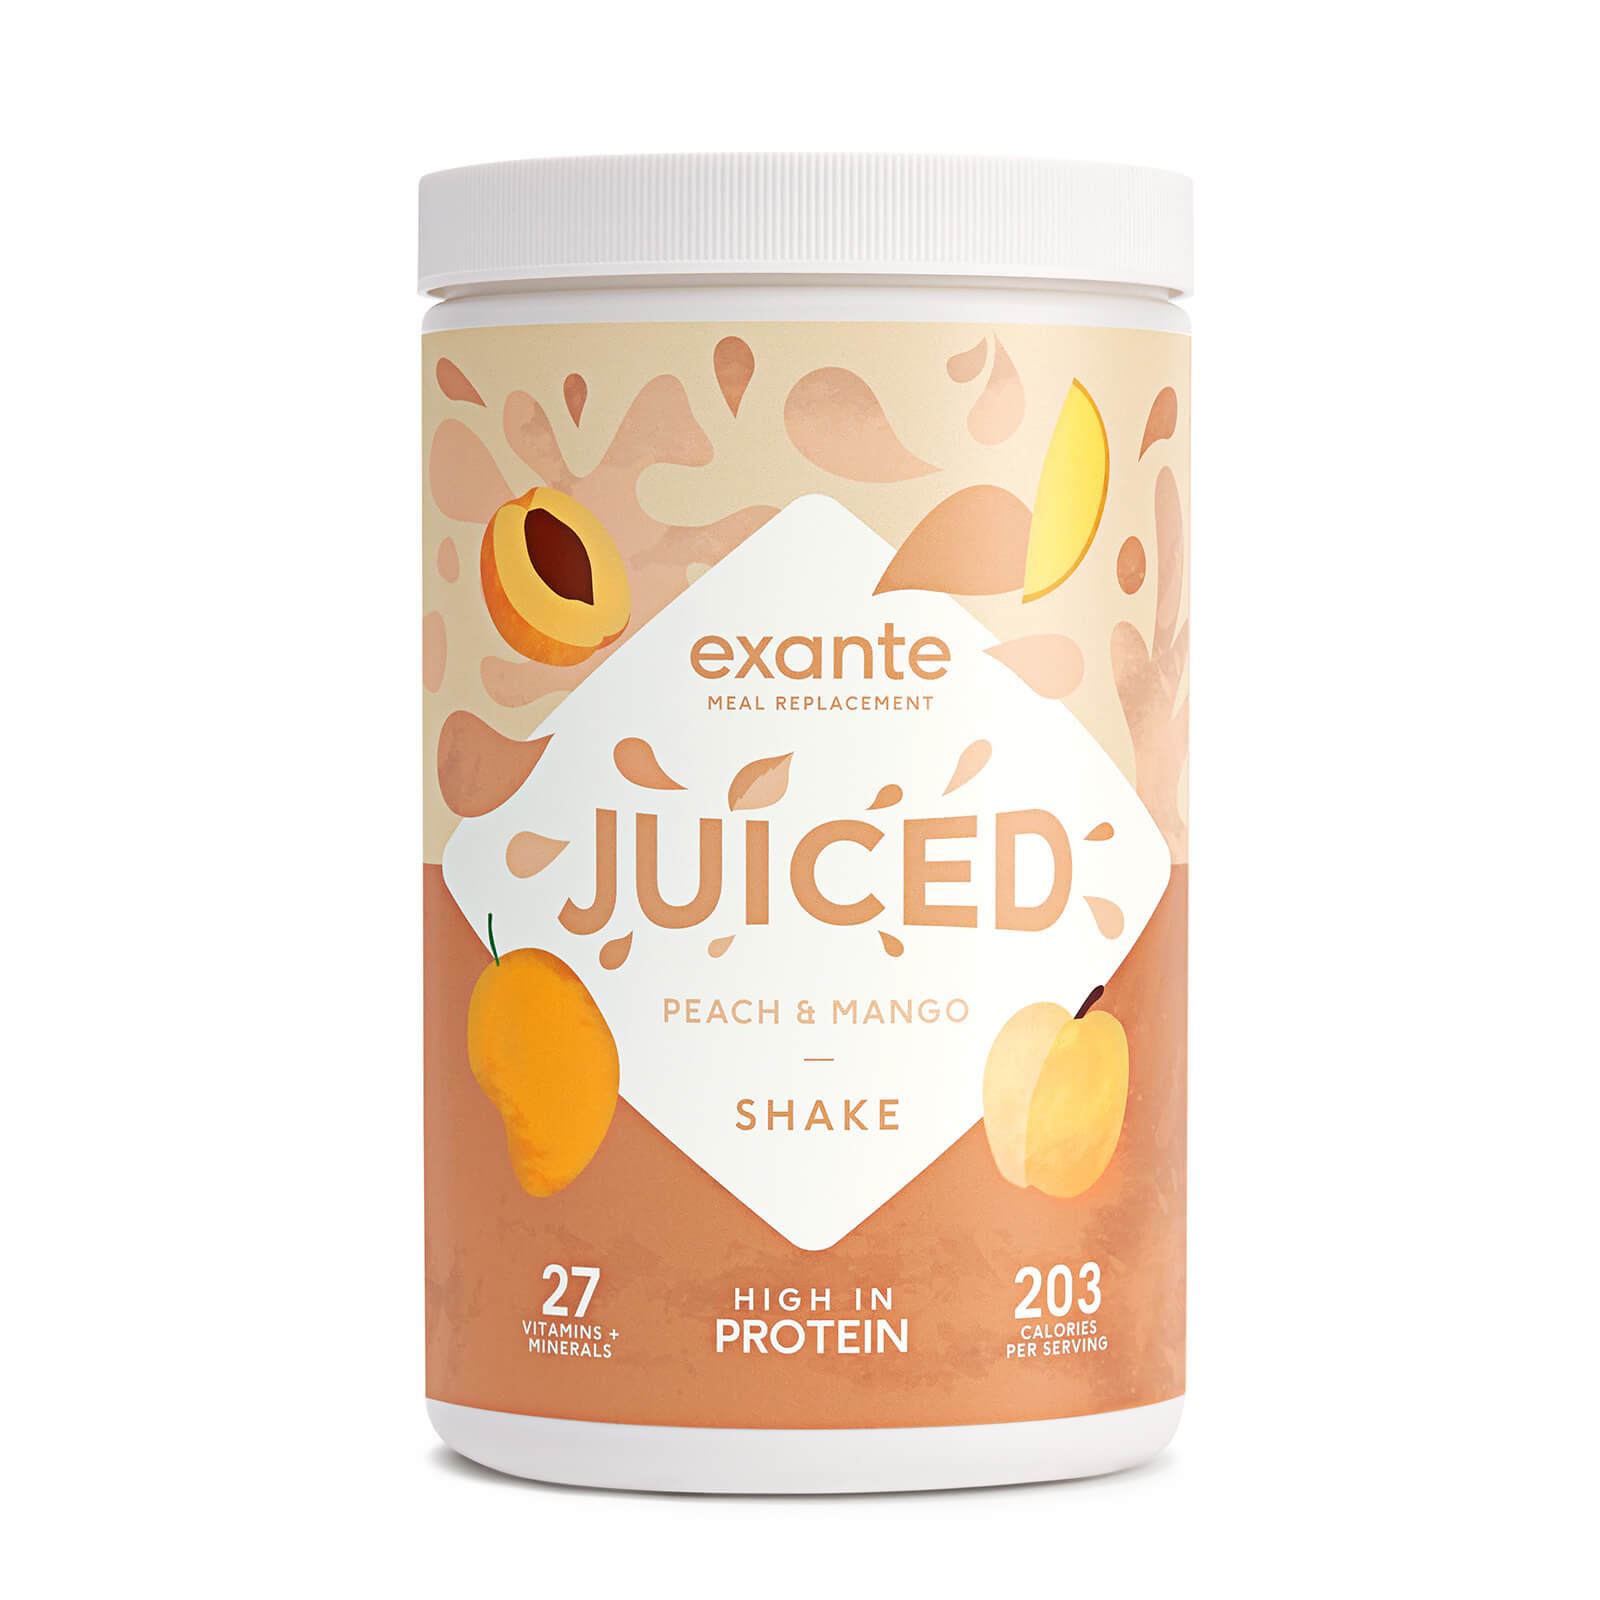 exante Diet Peach & Mango JUICED Meal Replacement Shake 10 Serve Tub